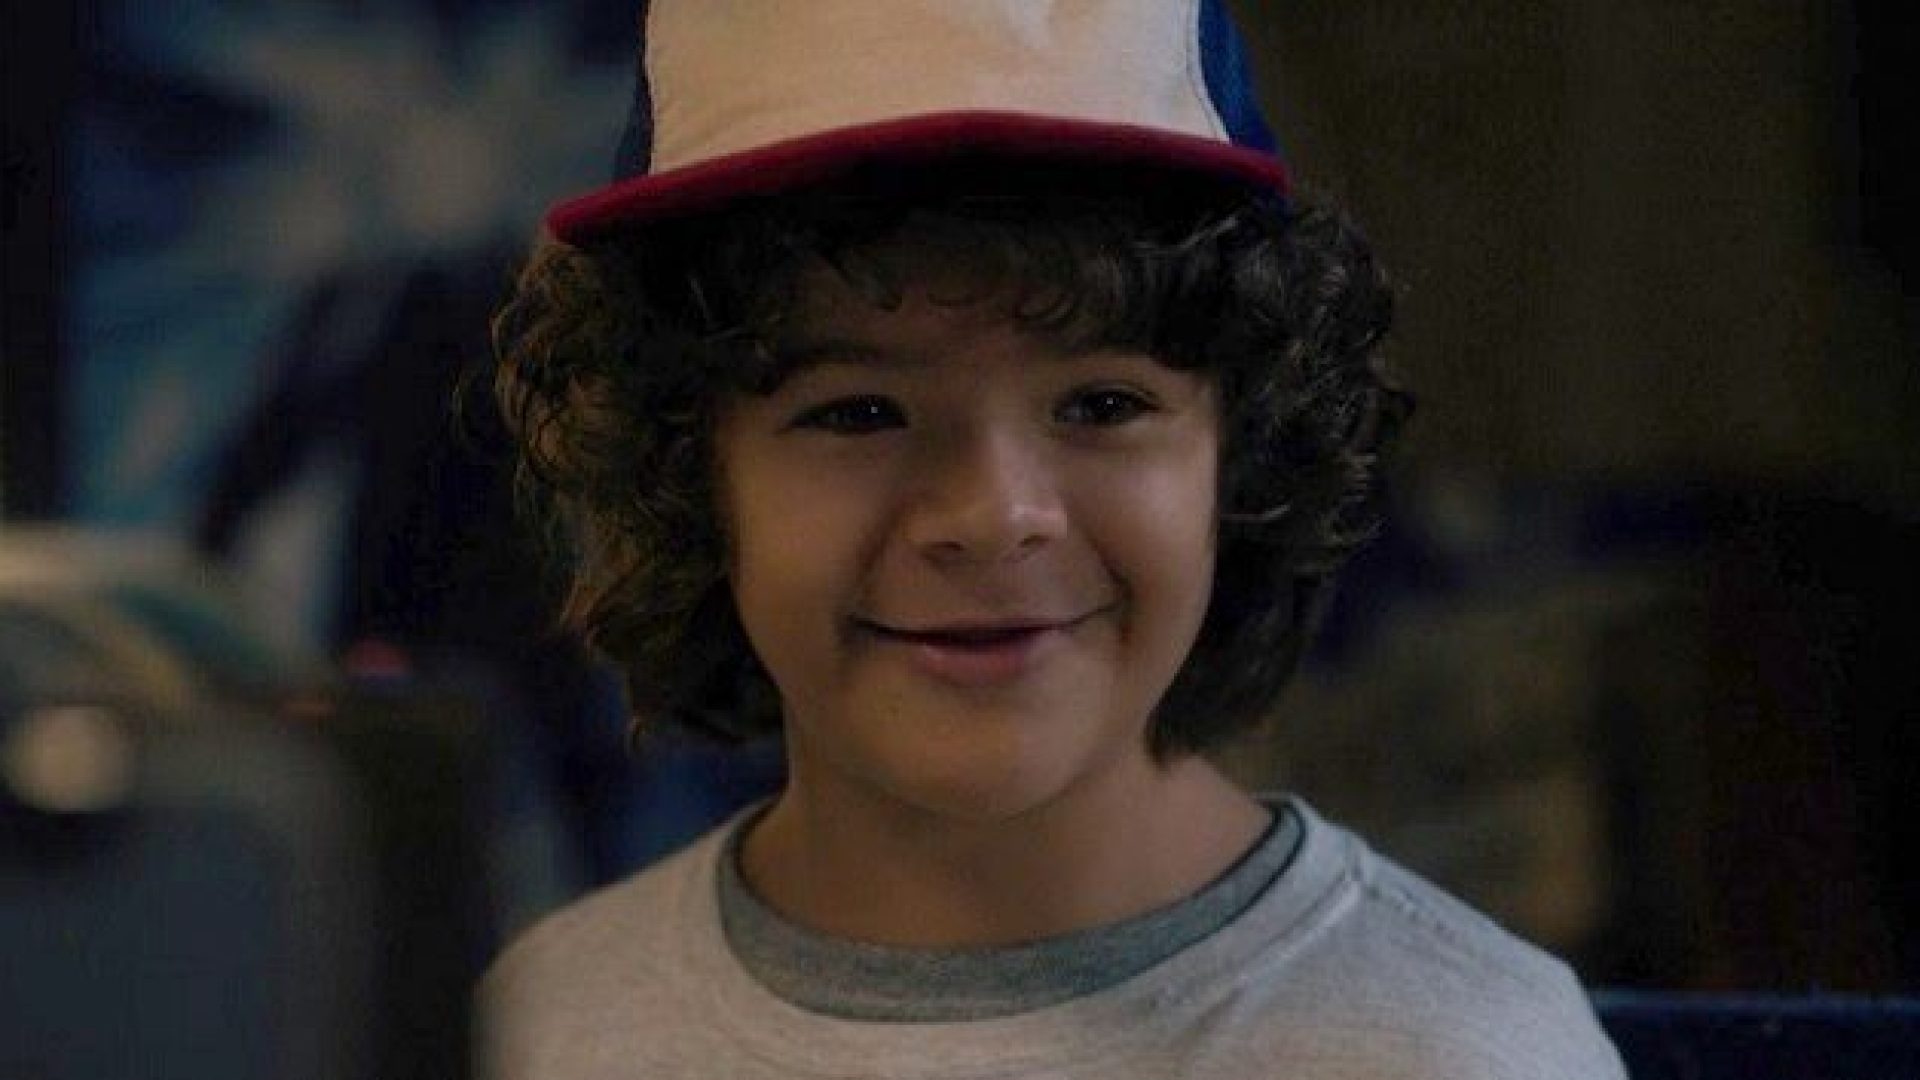 How come we never knew that Dustin from "Stranger Things" is a secret